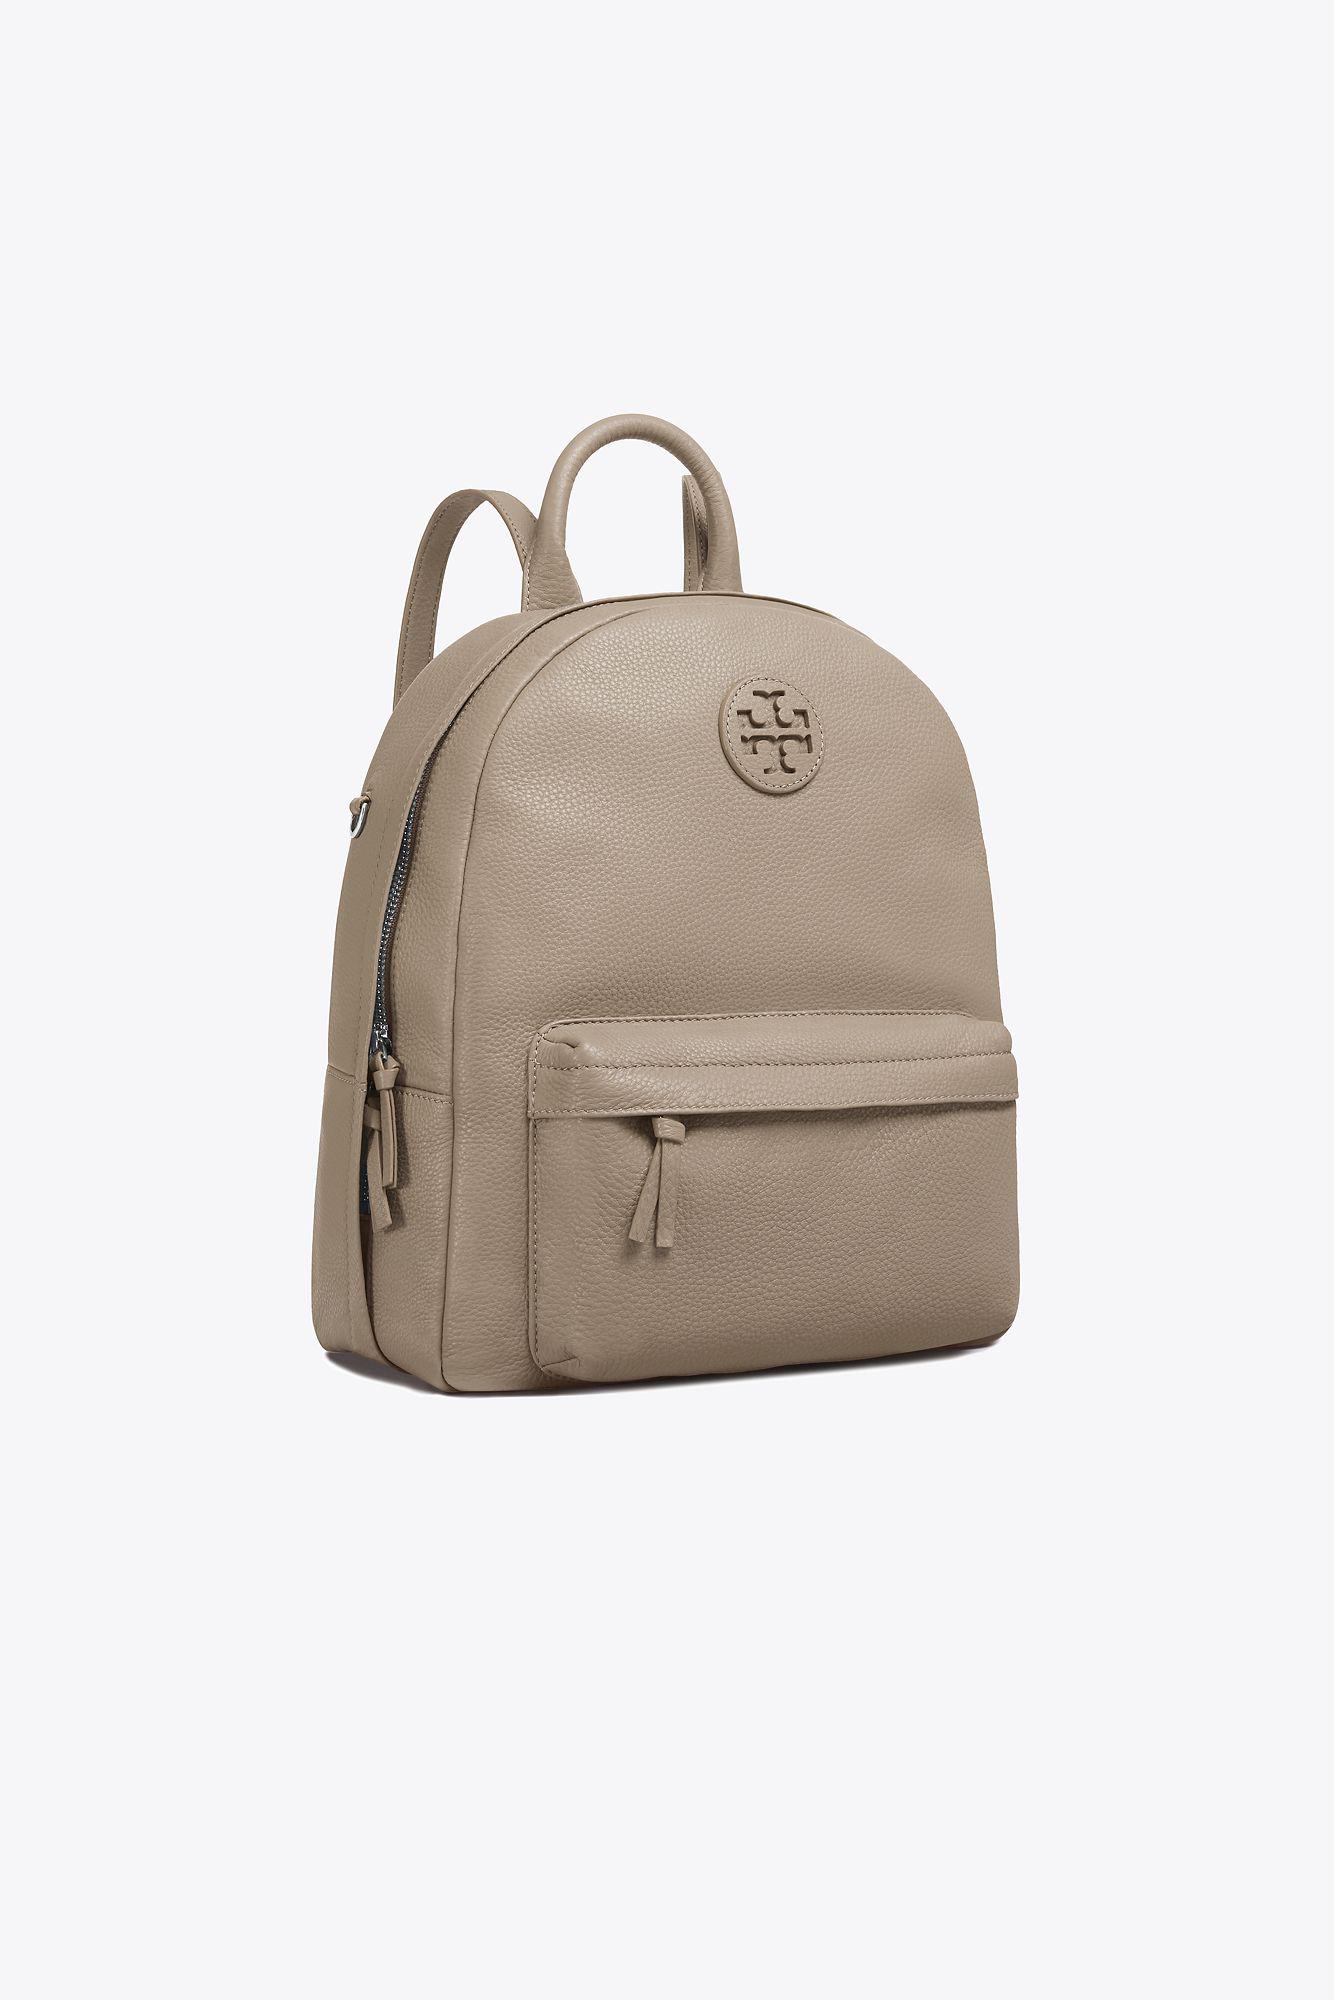 Tory Burch LEATHER BACKPACK